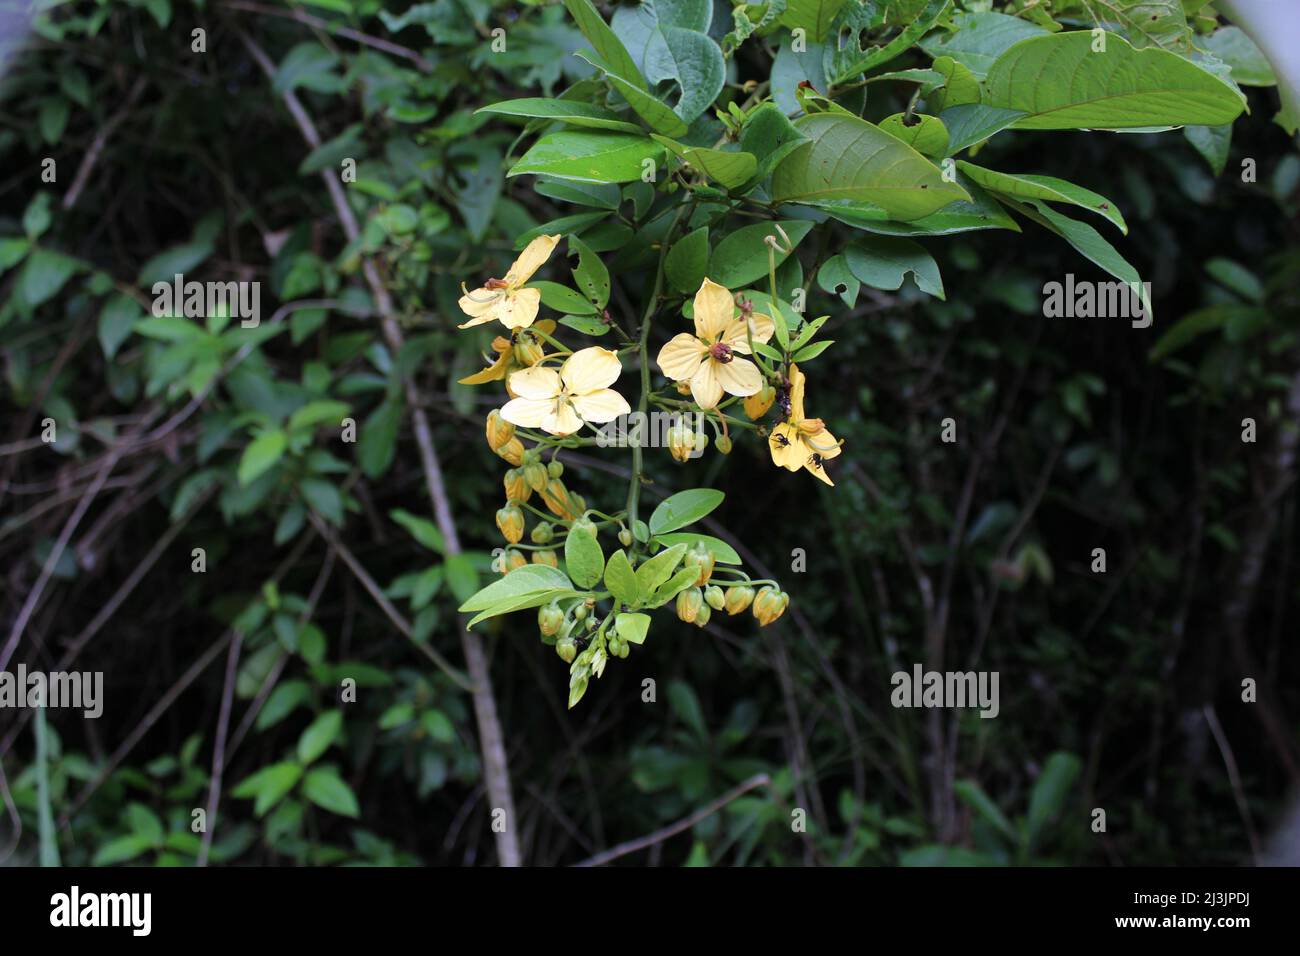 branch with the pale yellow five petal flowers of The Christmas Tree (Senna hayesiana) growing in the jungle of Central America Stock Photo